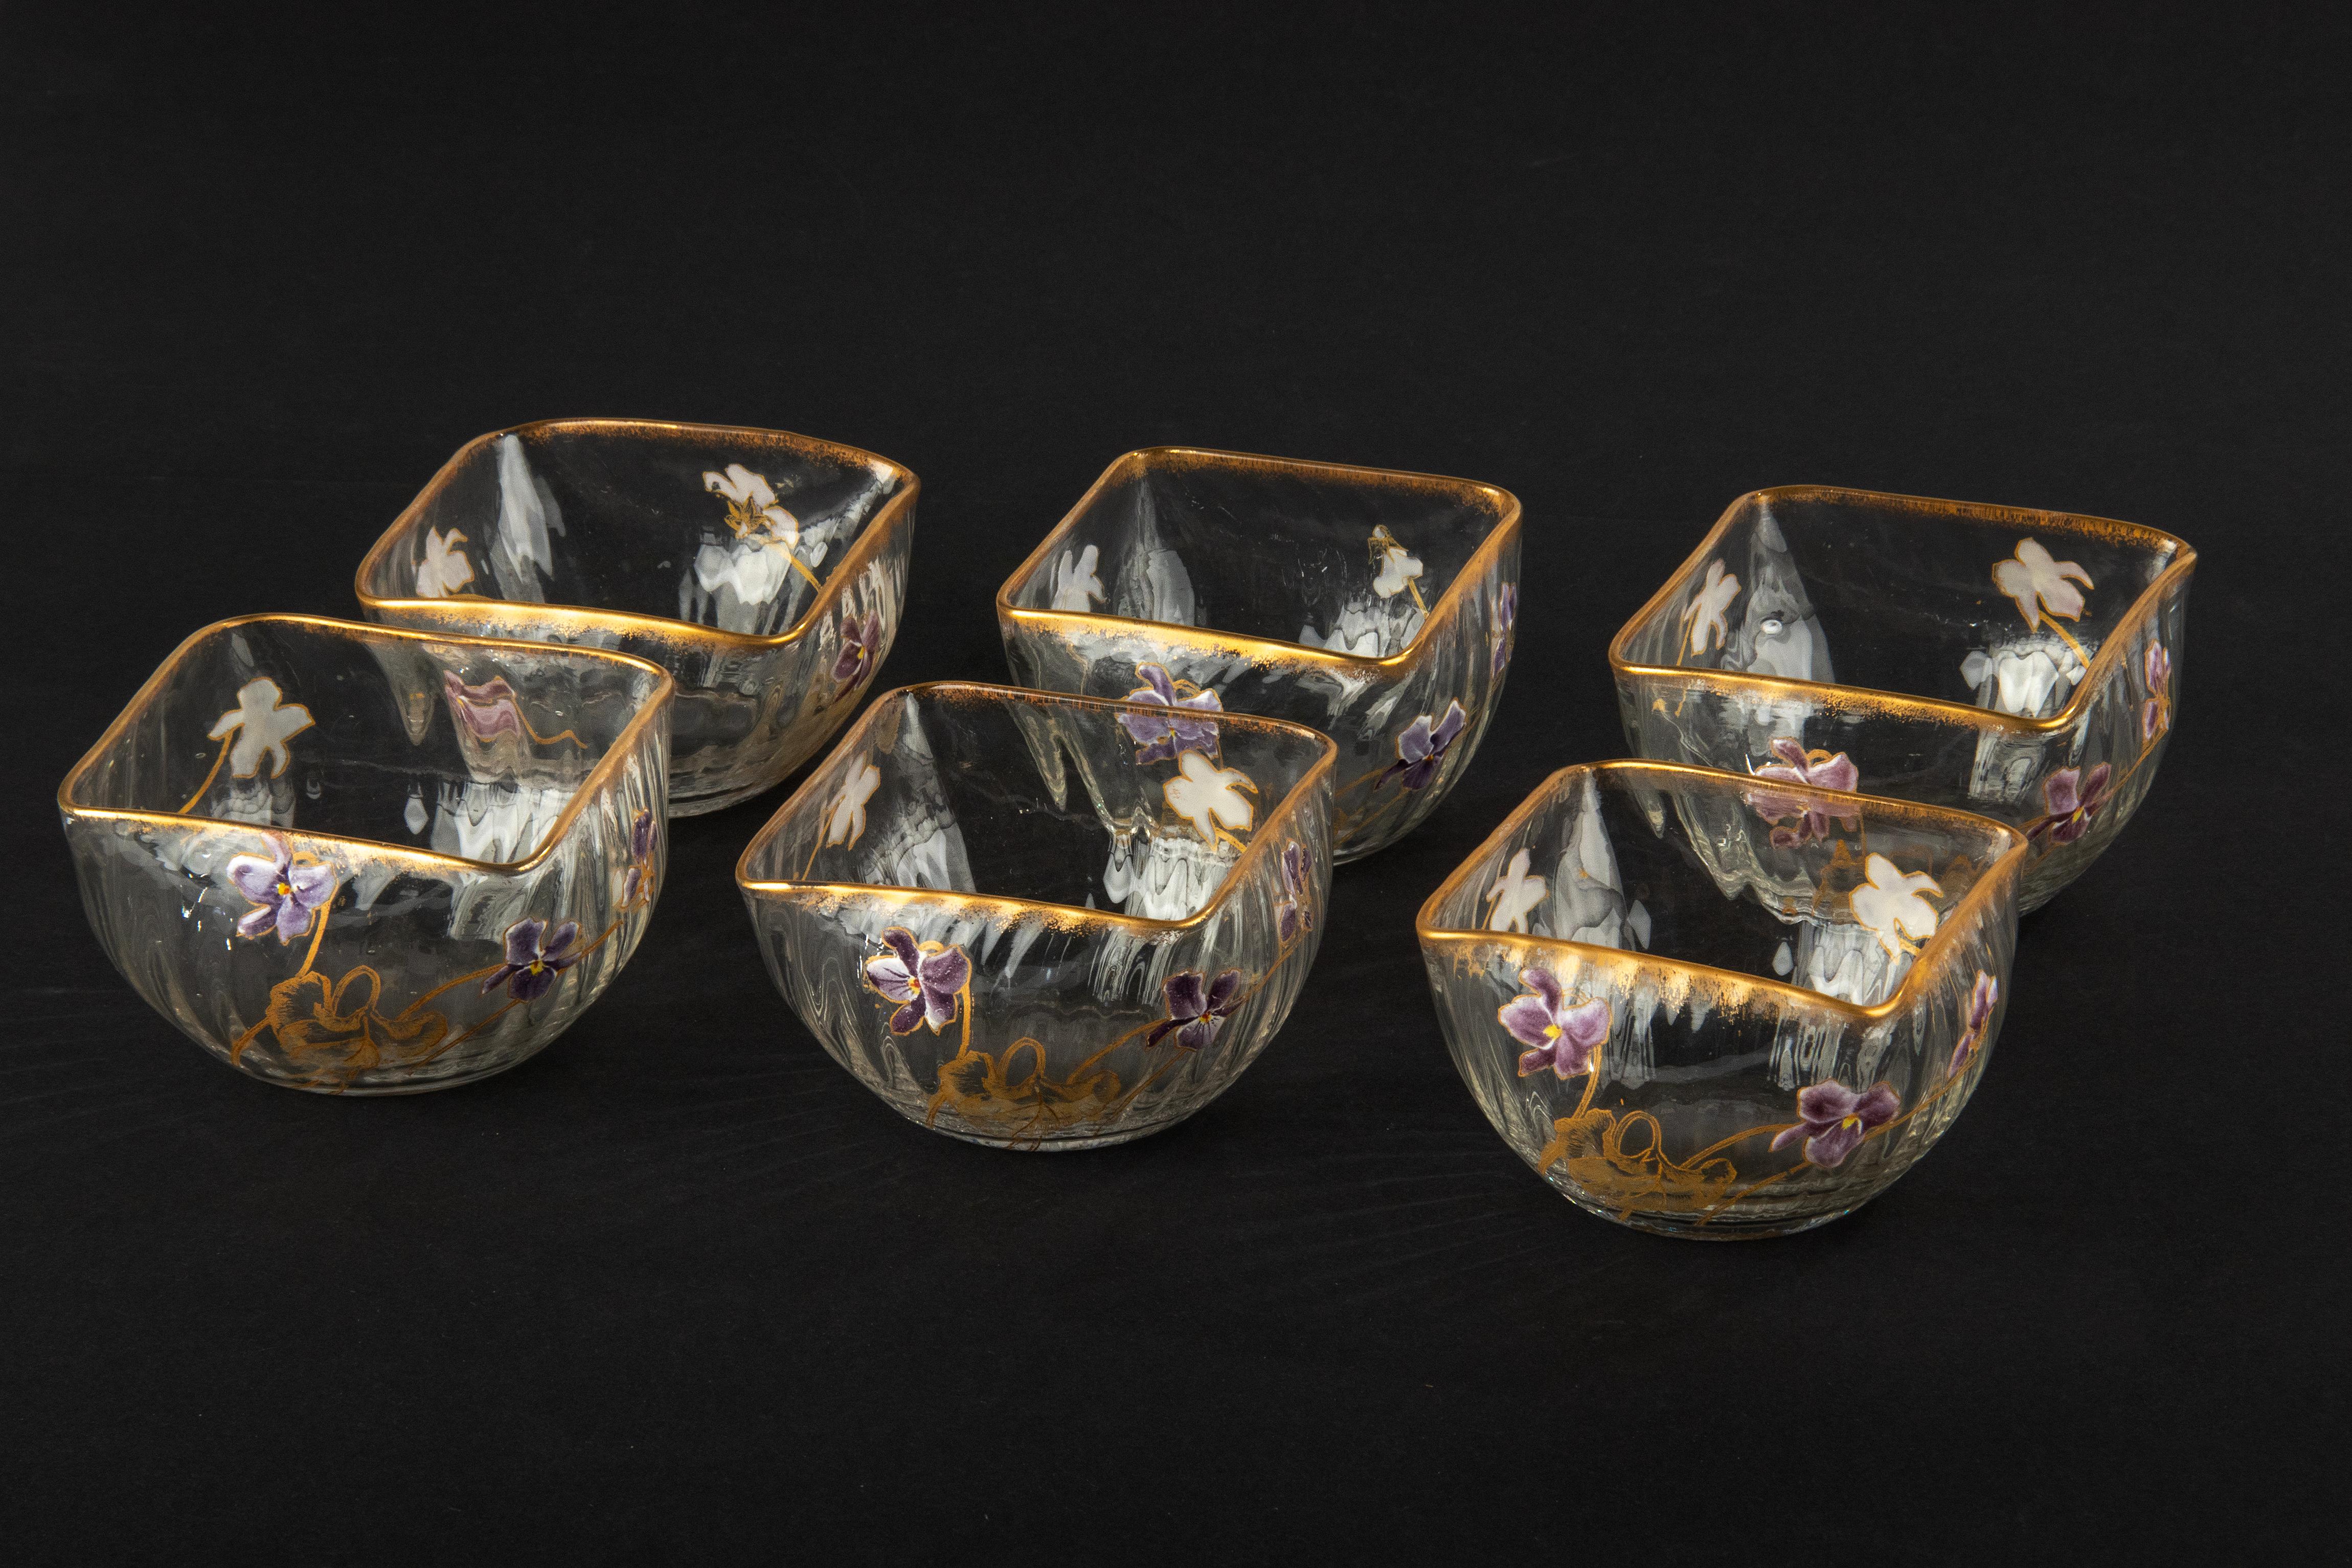 A lovely set of 6 crystal bowls, attributed to the French manufacturer Daum Nancy. The bowls are beautifully painted with flowers and gold-coloured accents, entirely in Art Nouveau style. The bowls are not marked, but the shape of the bowls, the